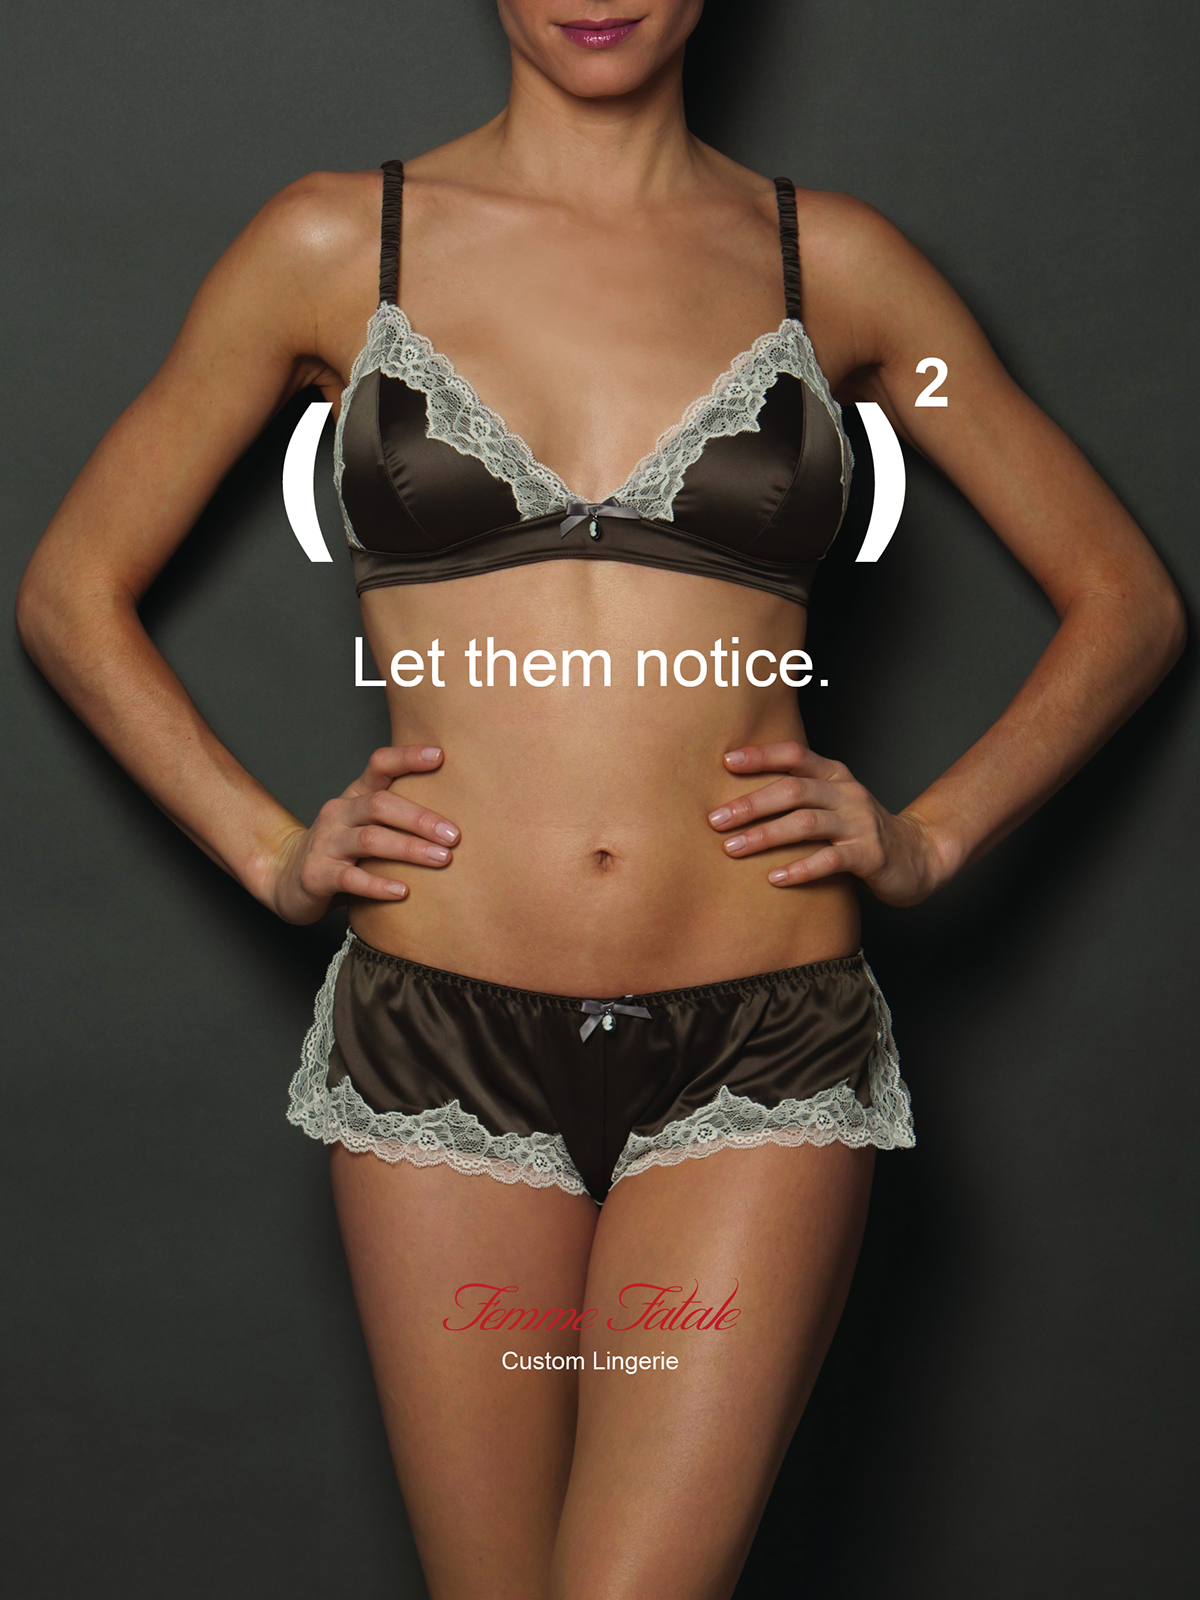 lingerie Advertising Campaign business card Mona Lisa bra illusion